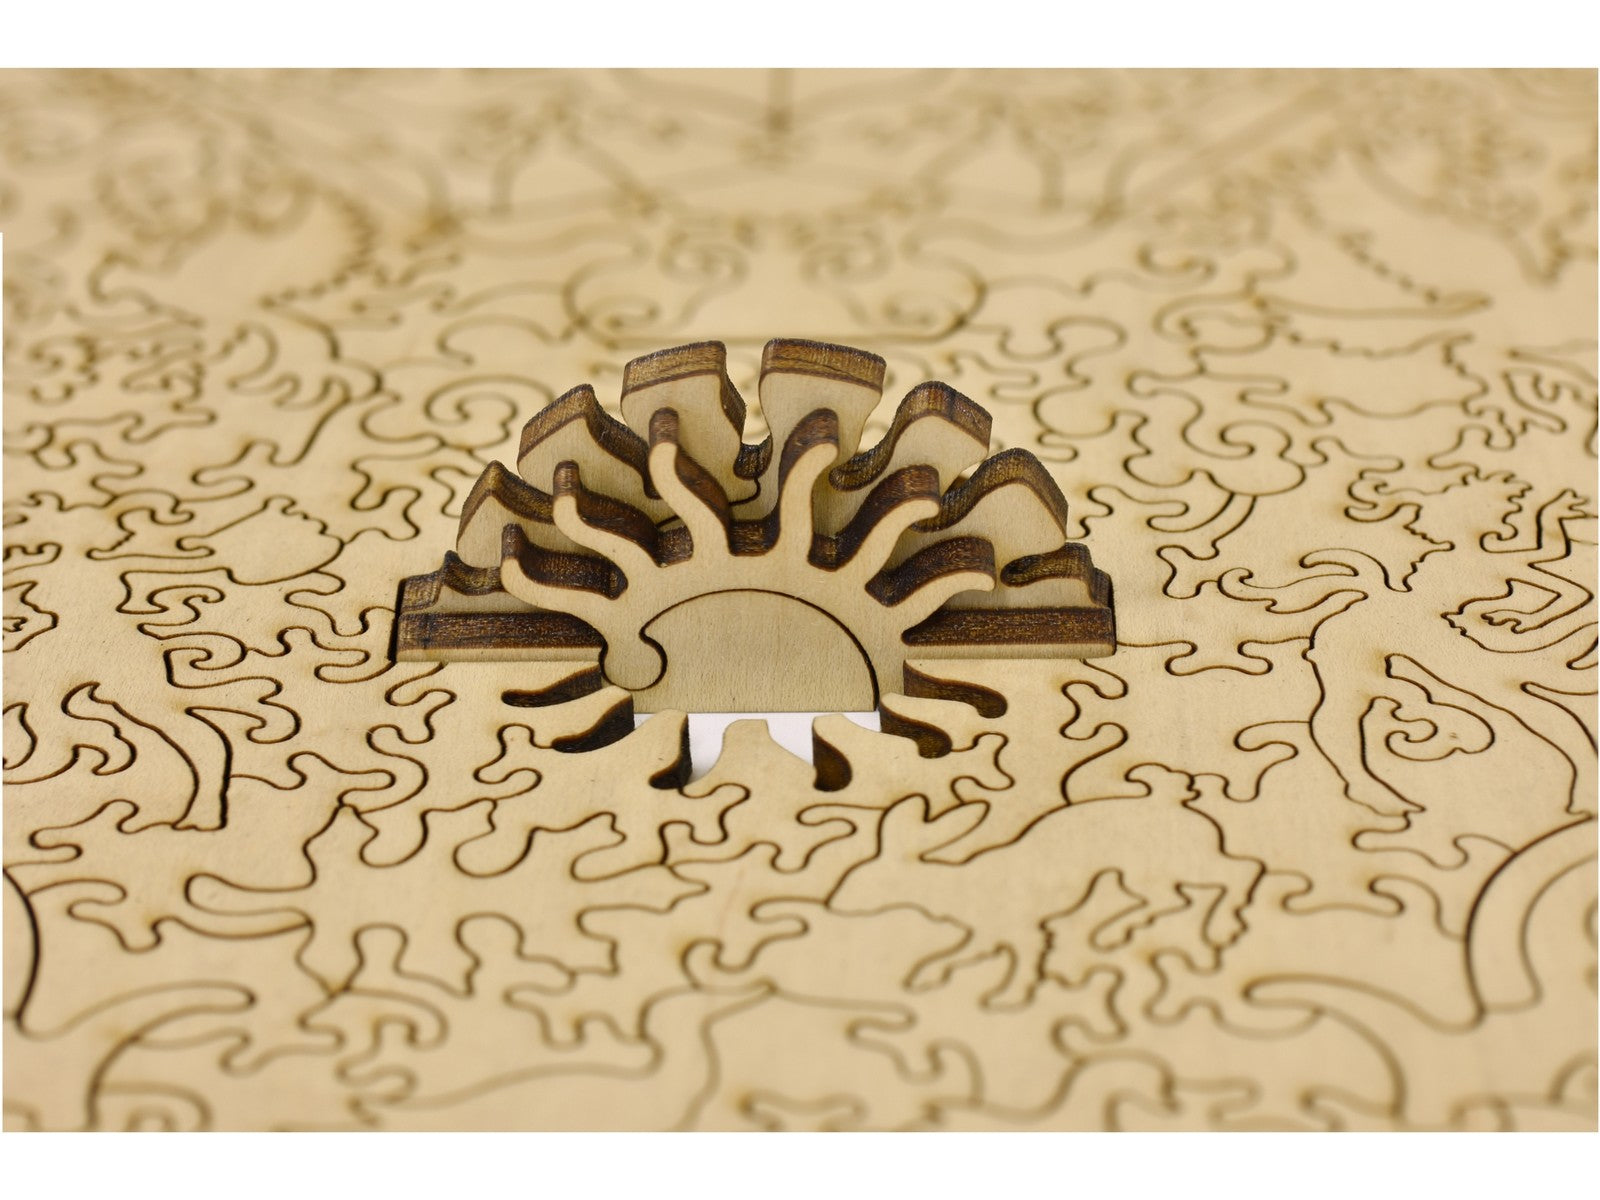 A closeup of pieces in the shape of a rising sun.